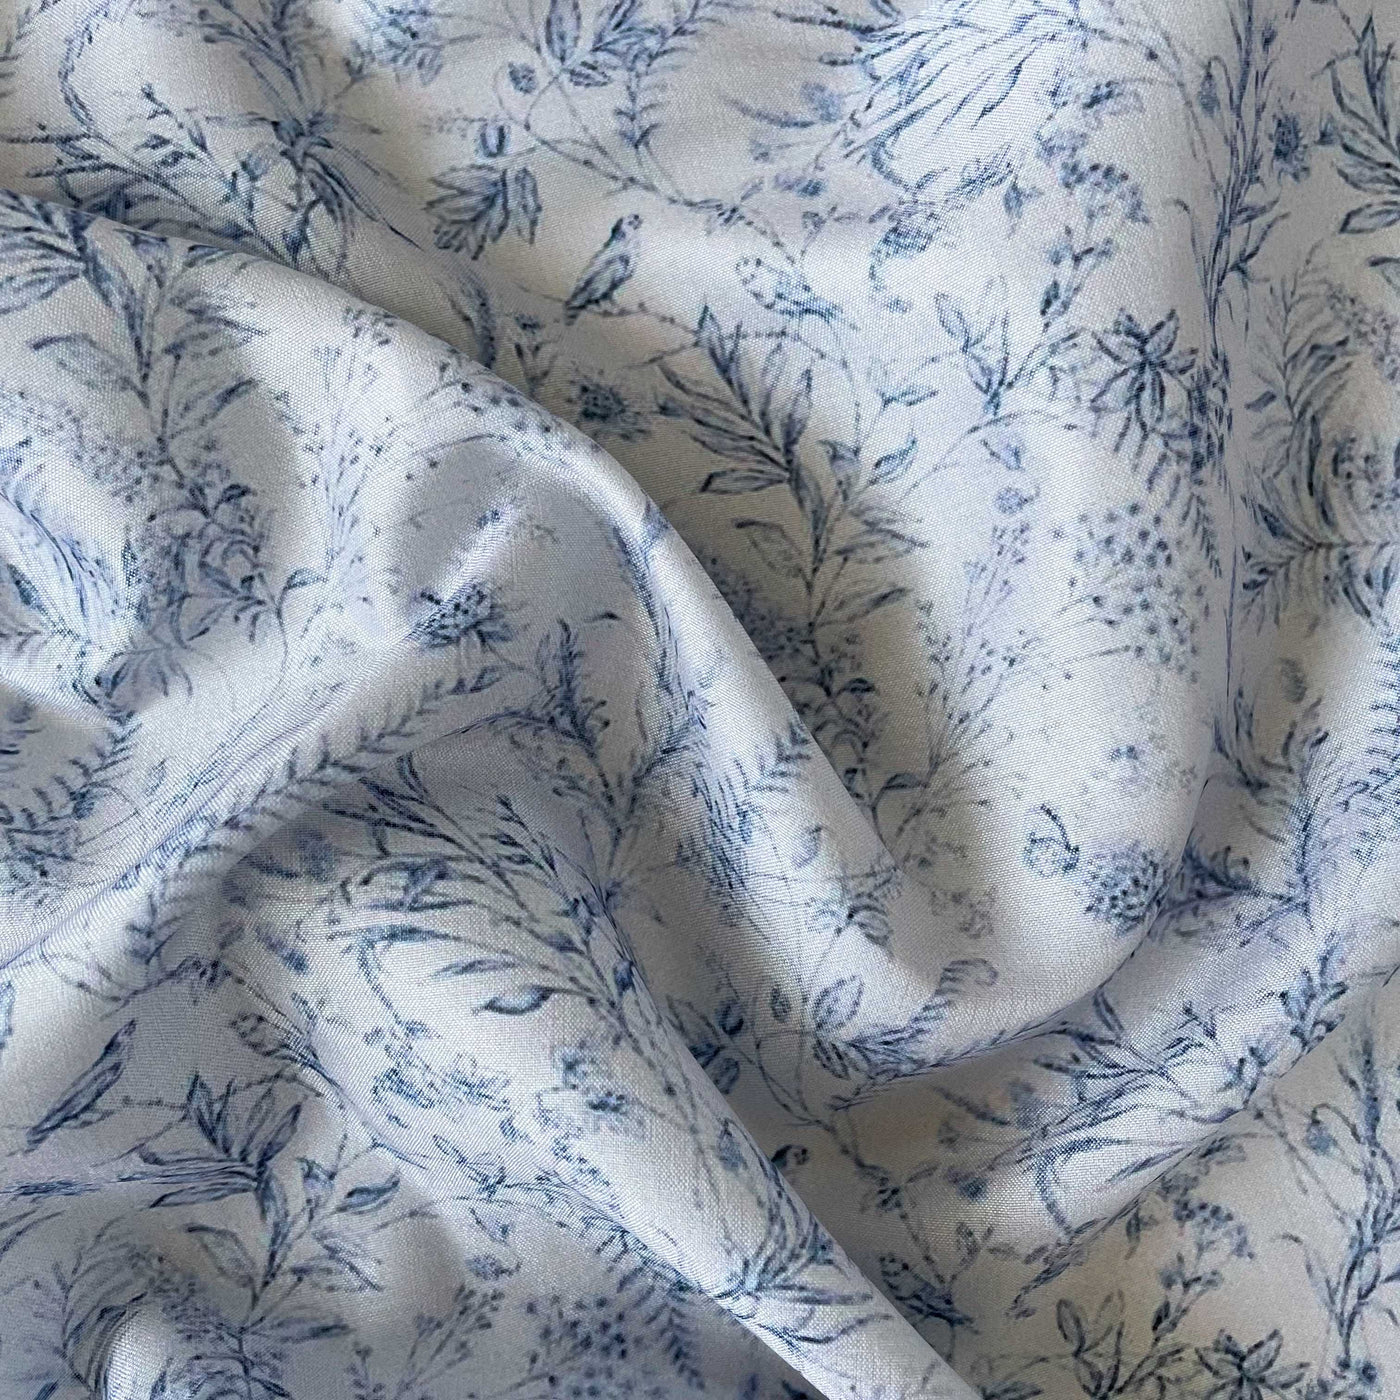 Digital Printed Tussar Satin Fabric Fabric Blue & Grey Victorian Floral Garden Printed Tussar Satin Fabric (Width 44 Inches)